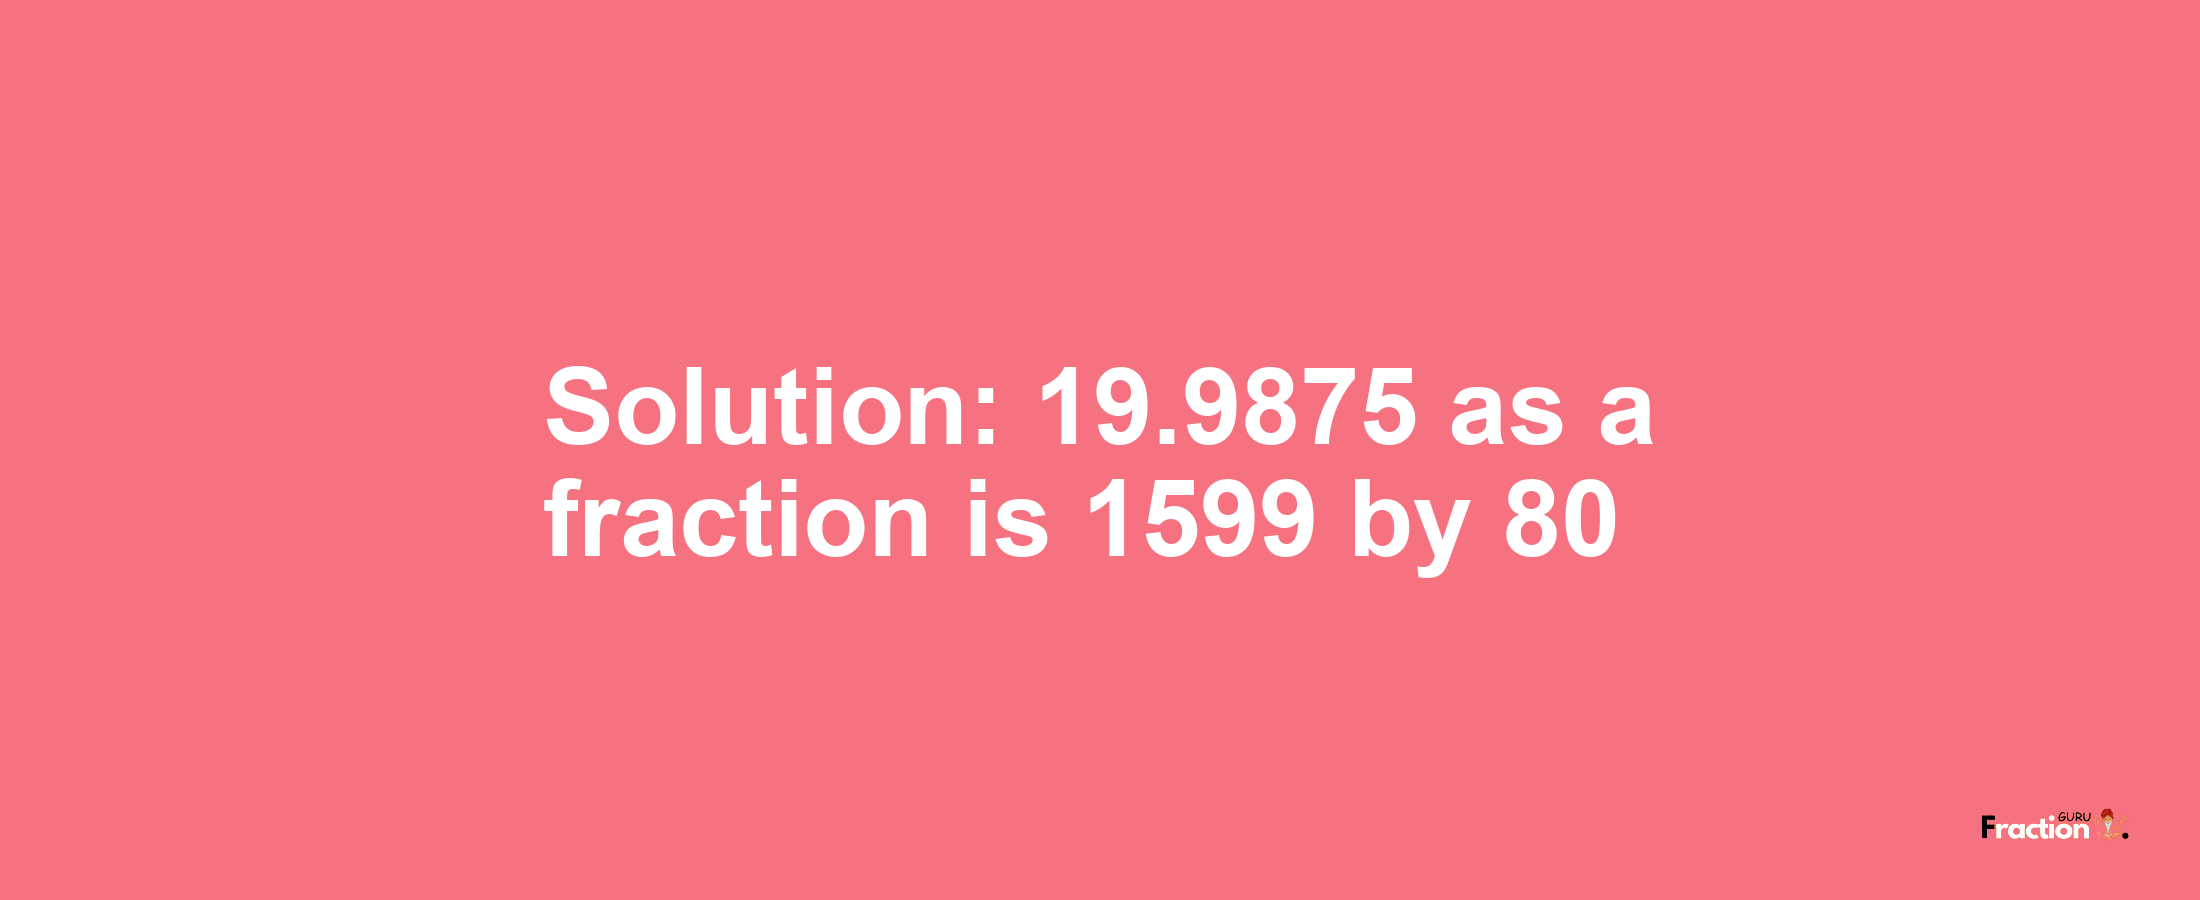 Solution:19.9875 as a fraction is 1599/80